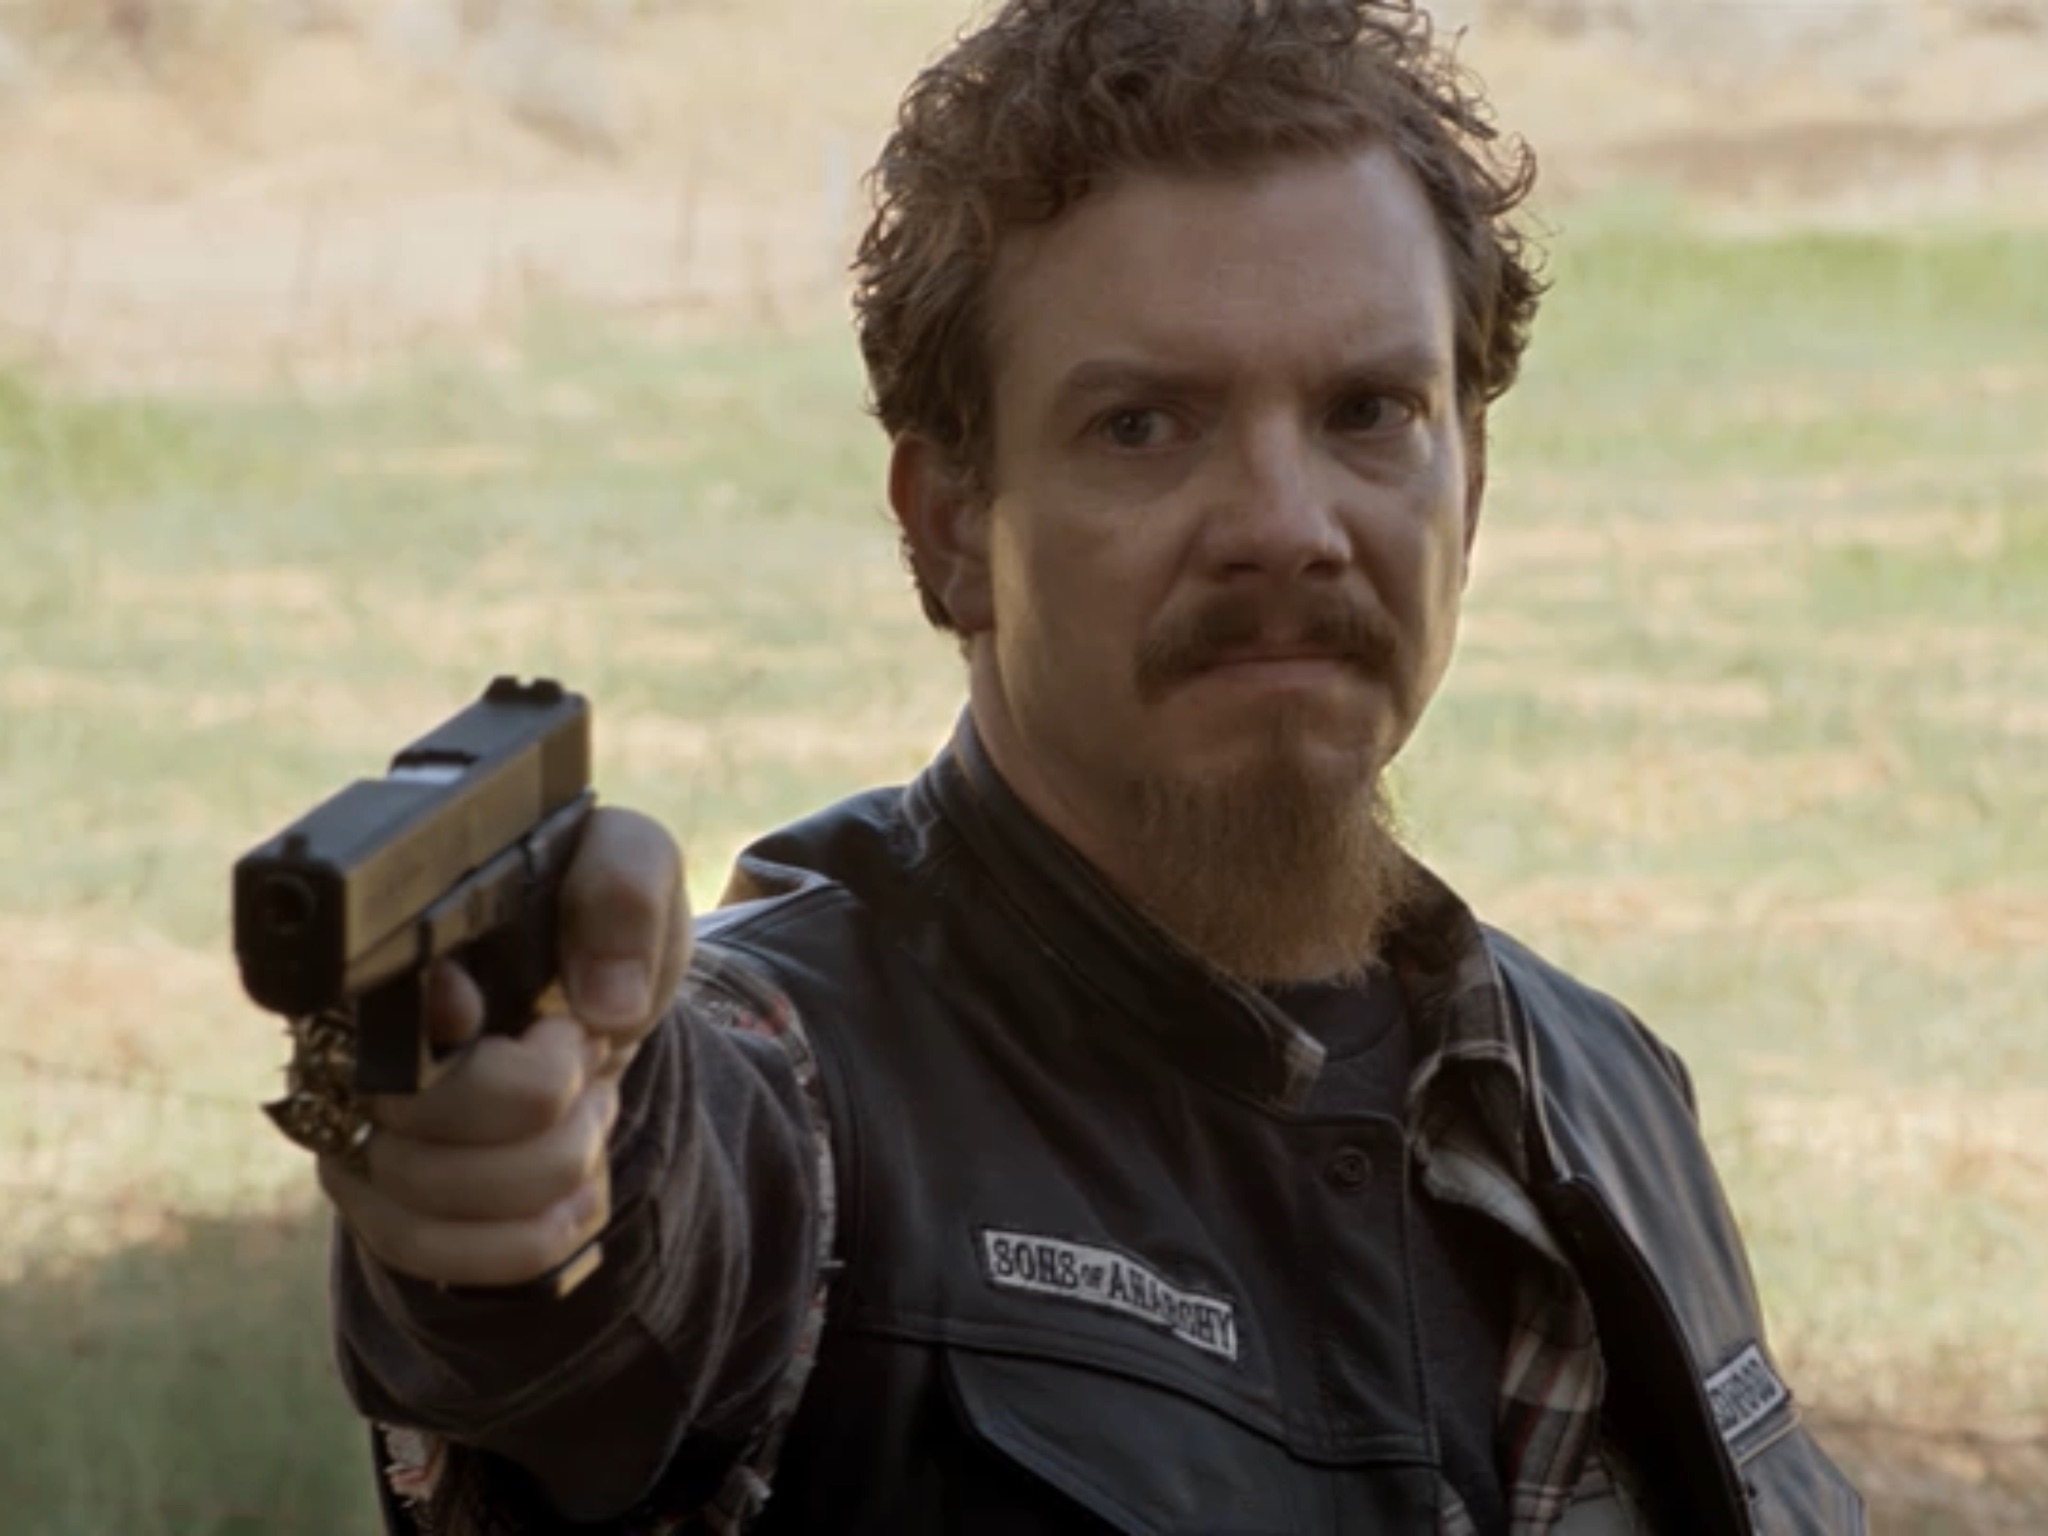 Frank Potter, as Eric Miles, Sons of Anarchy Season 4